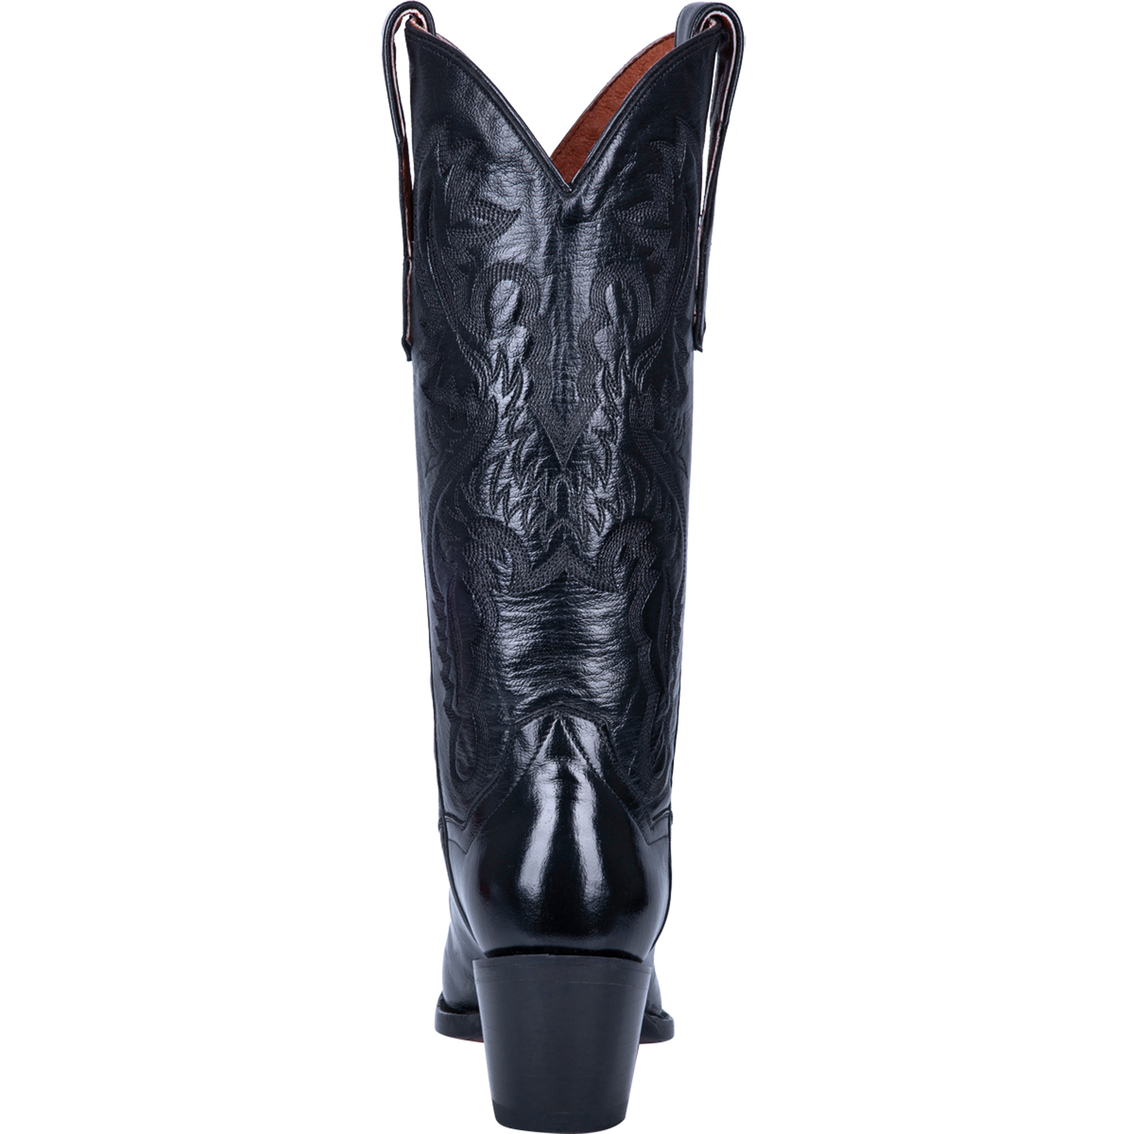 Dan Post 13 in. Leather Western Fashion Boot - Image 5 of 7